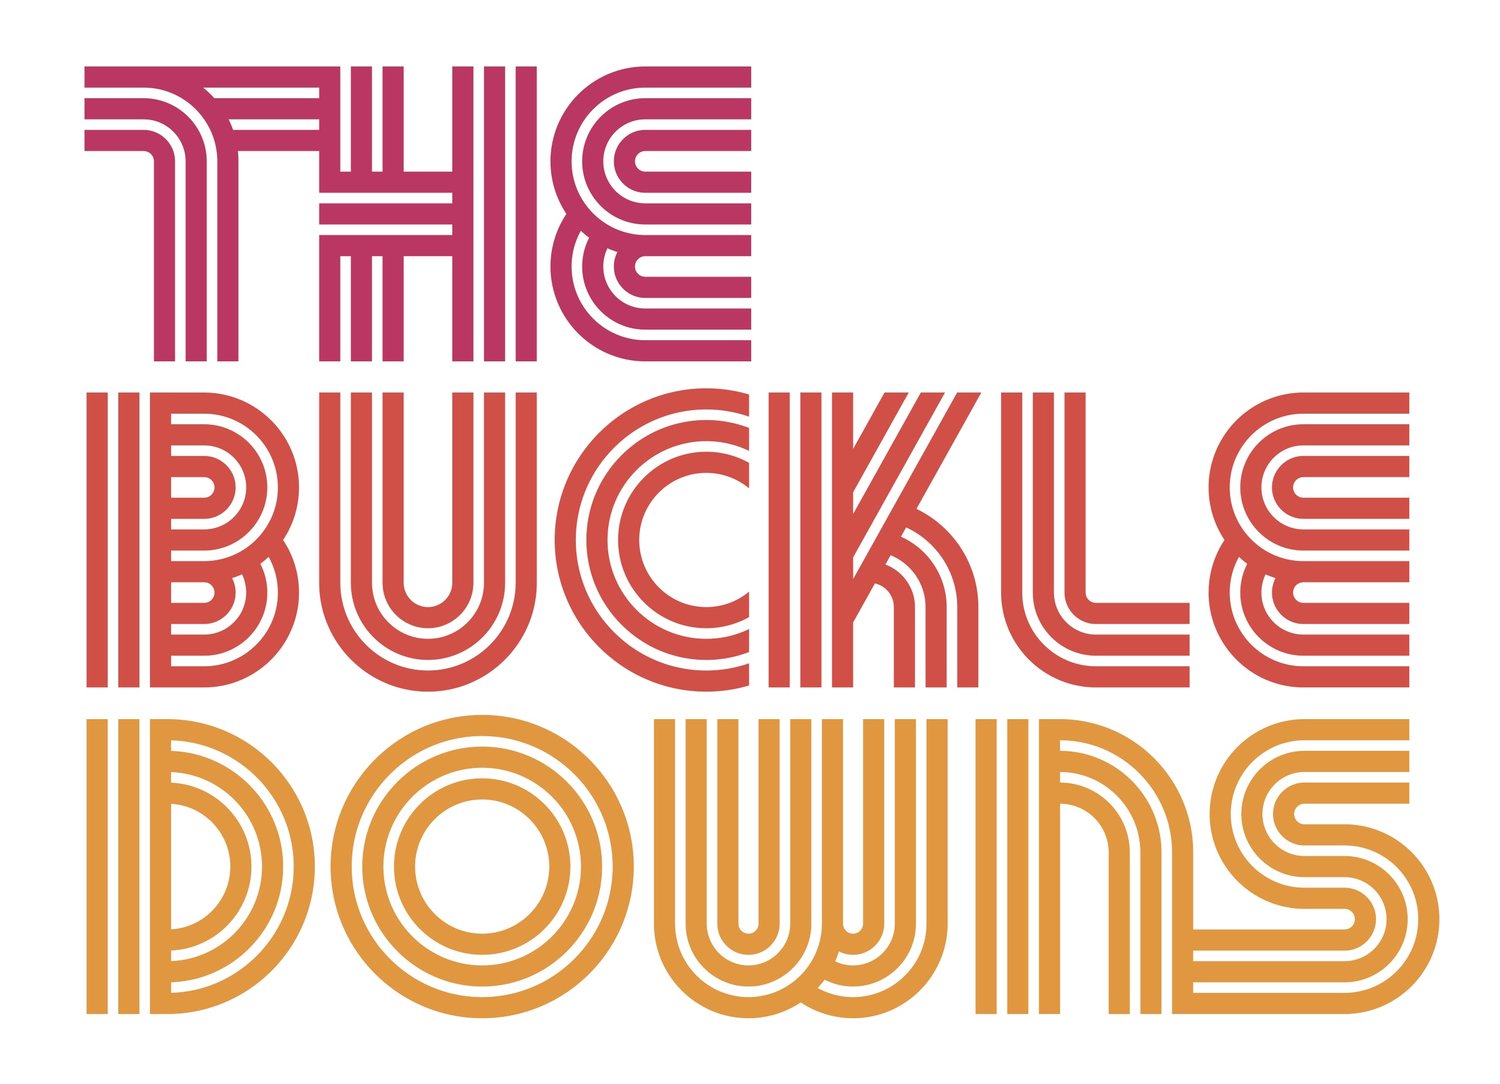 The Buckle Downs